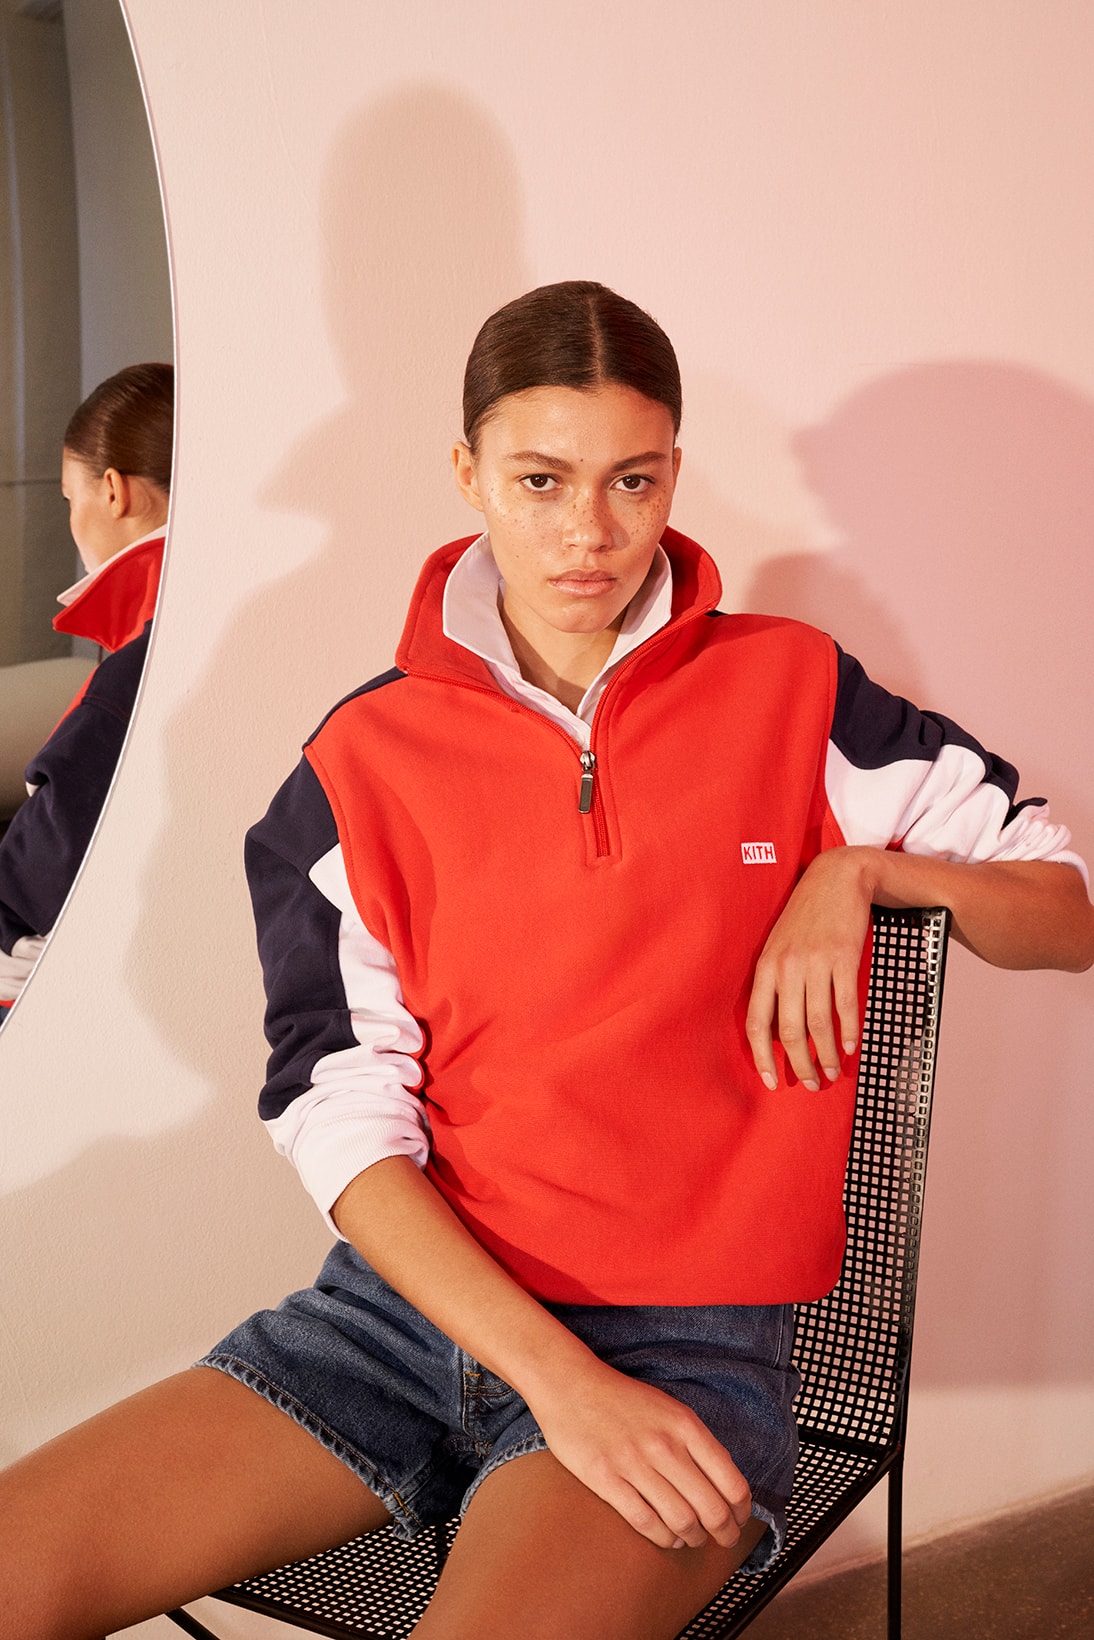 kith womens champion collaboration collection oversized sweatshirt logo hoodie cropped t-shirt 90s track jacket pants where to buy net-a-porter